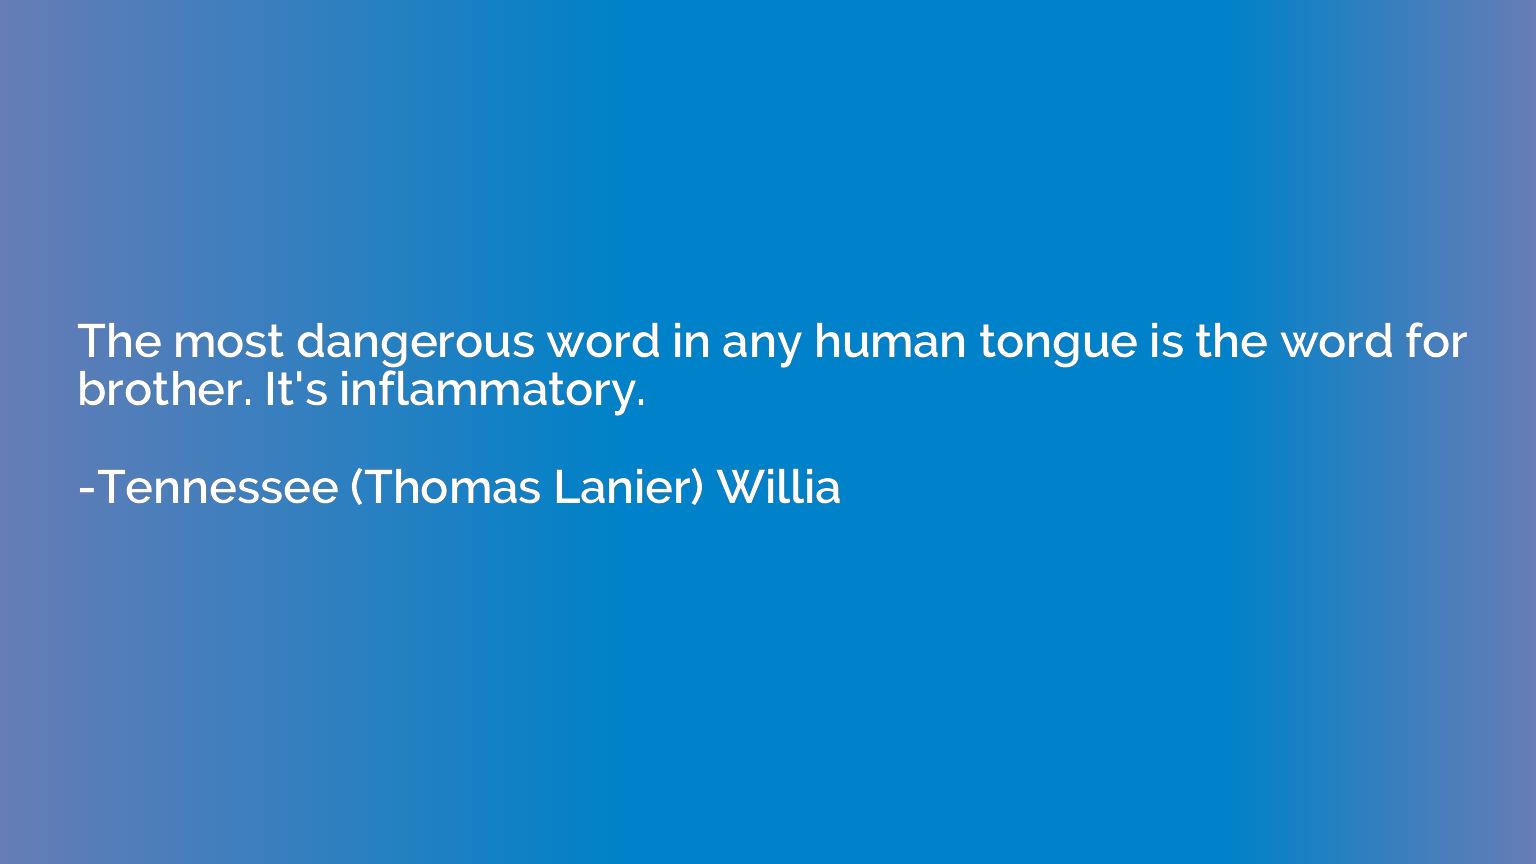 The most dangerous word in any human tongue is the word for 